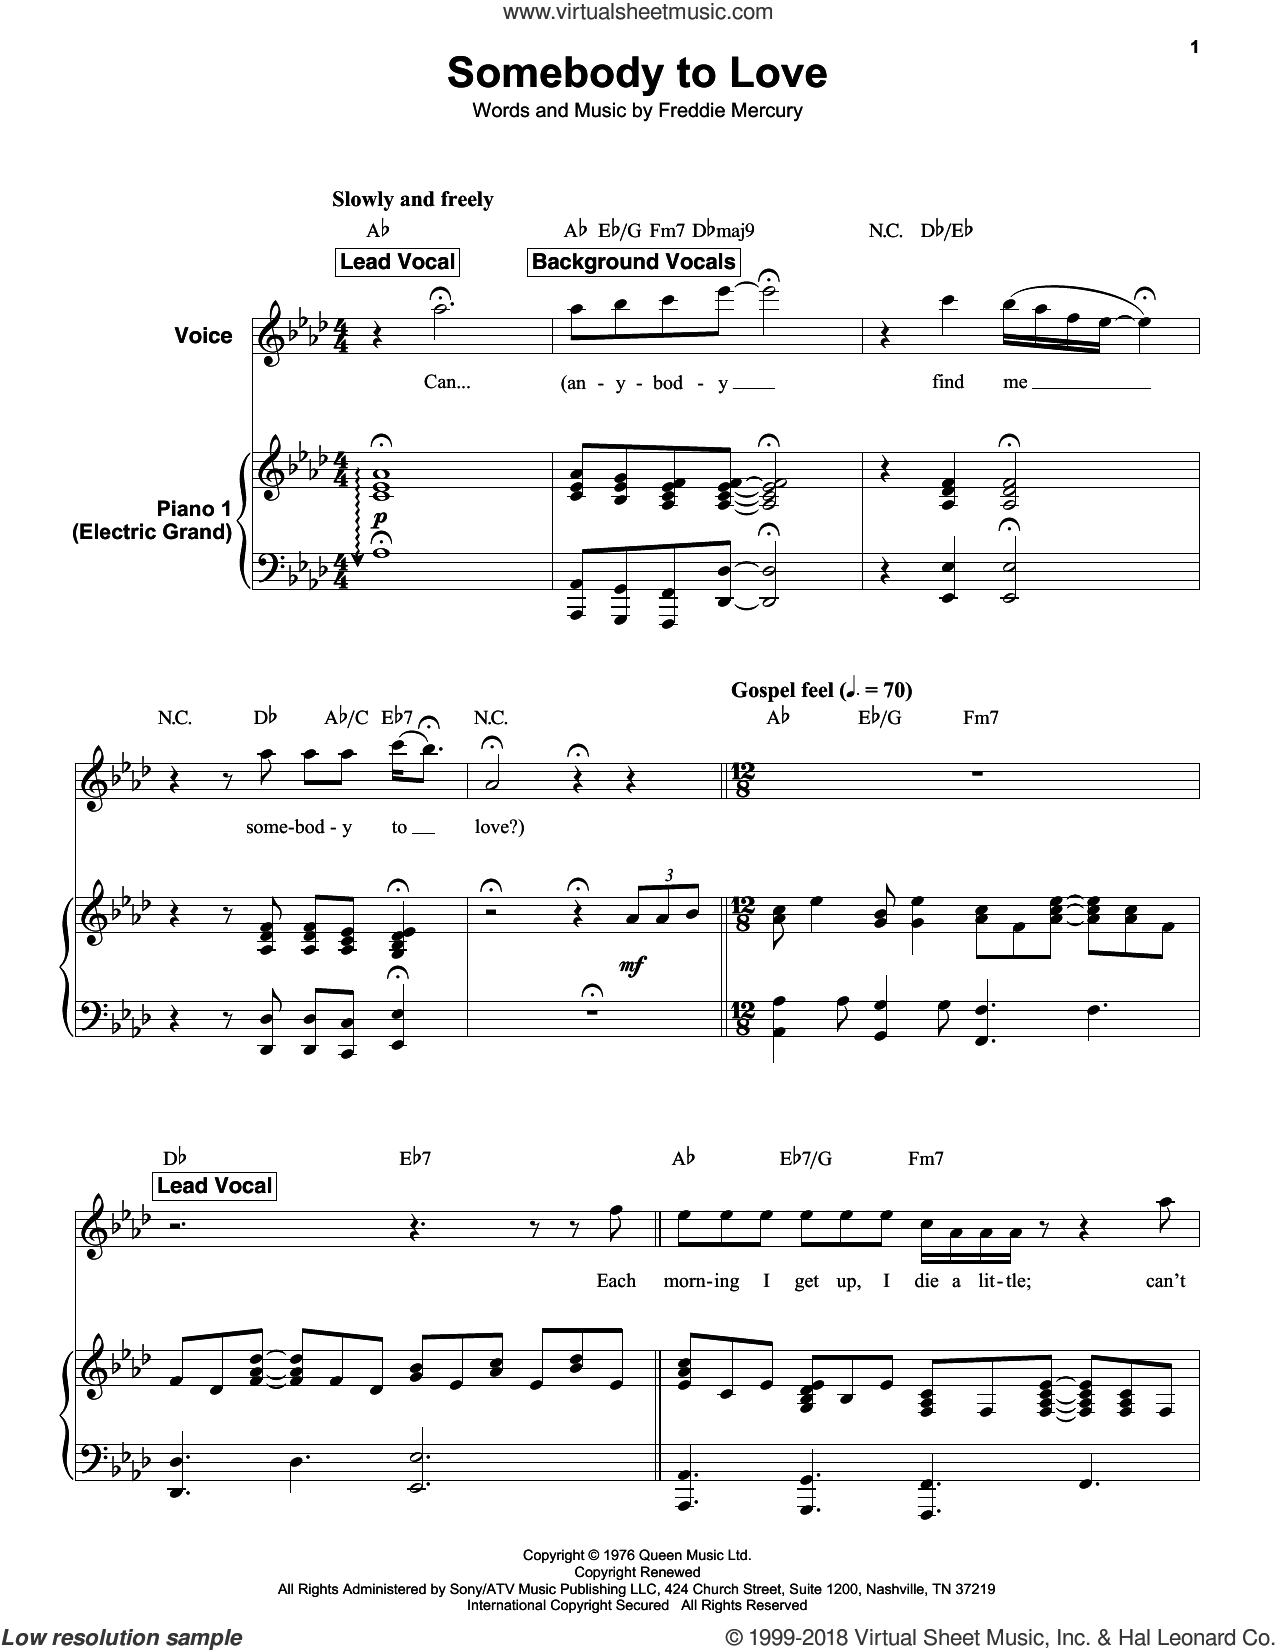 Free sheet music preview of Somebody To Love for keyboard or piano by Queen...